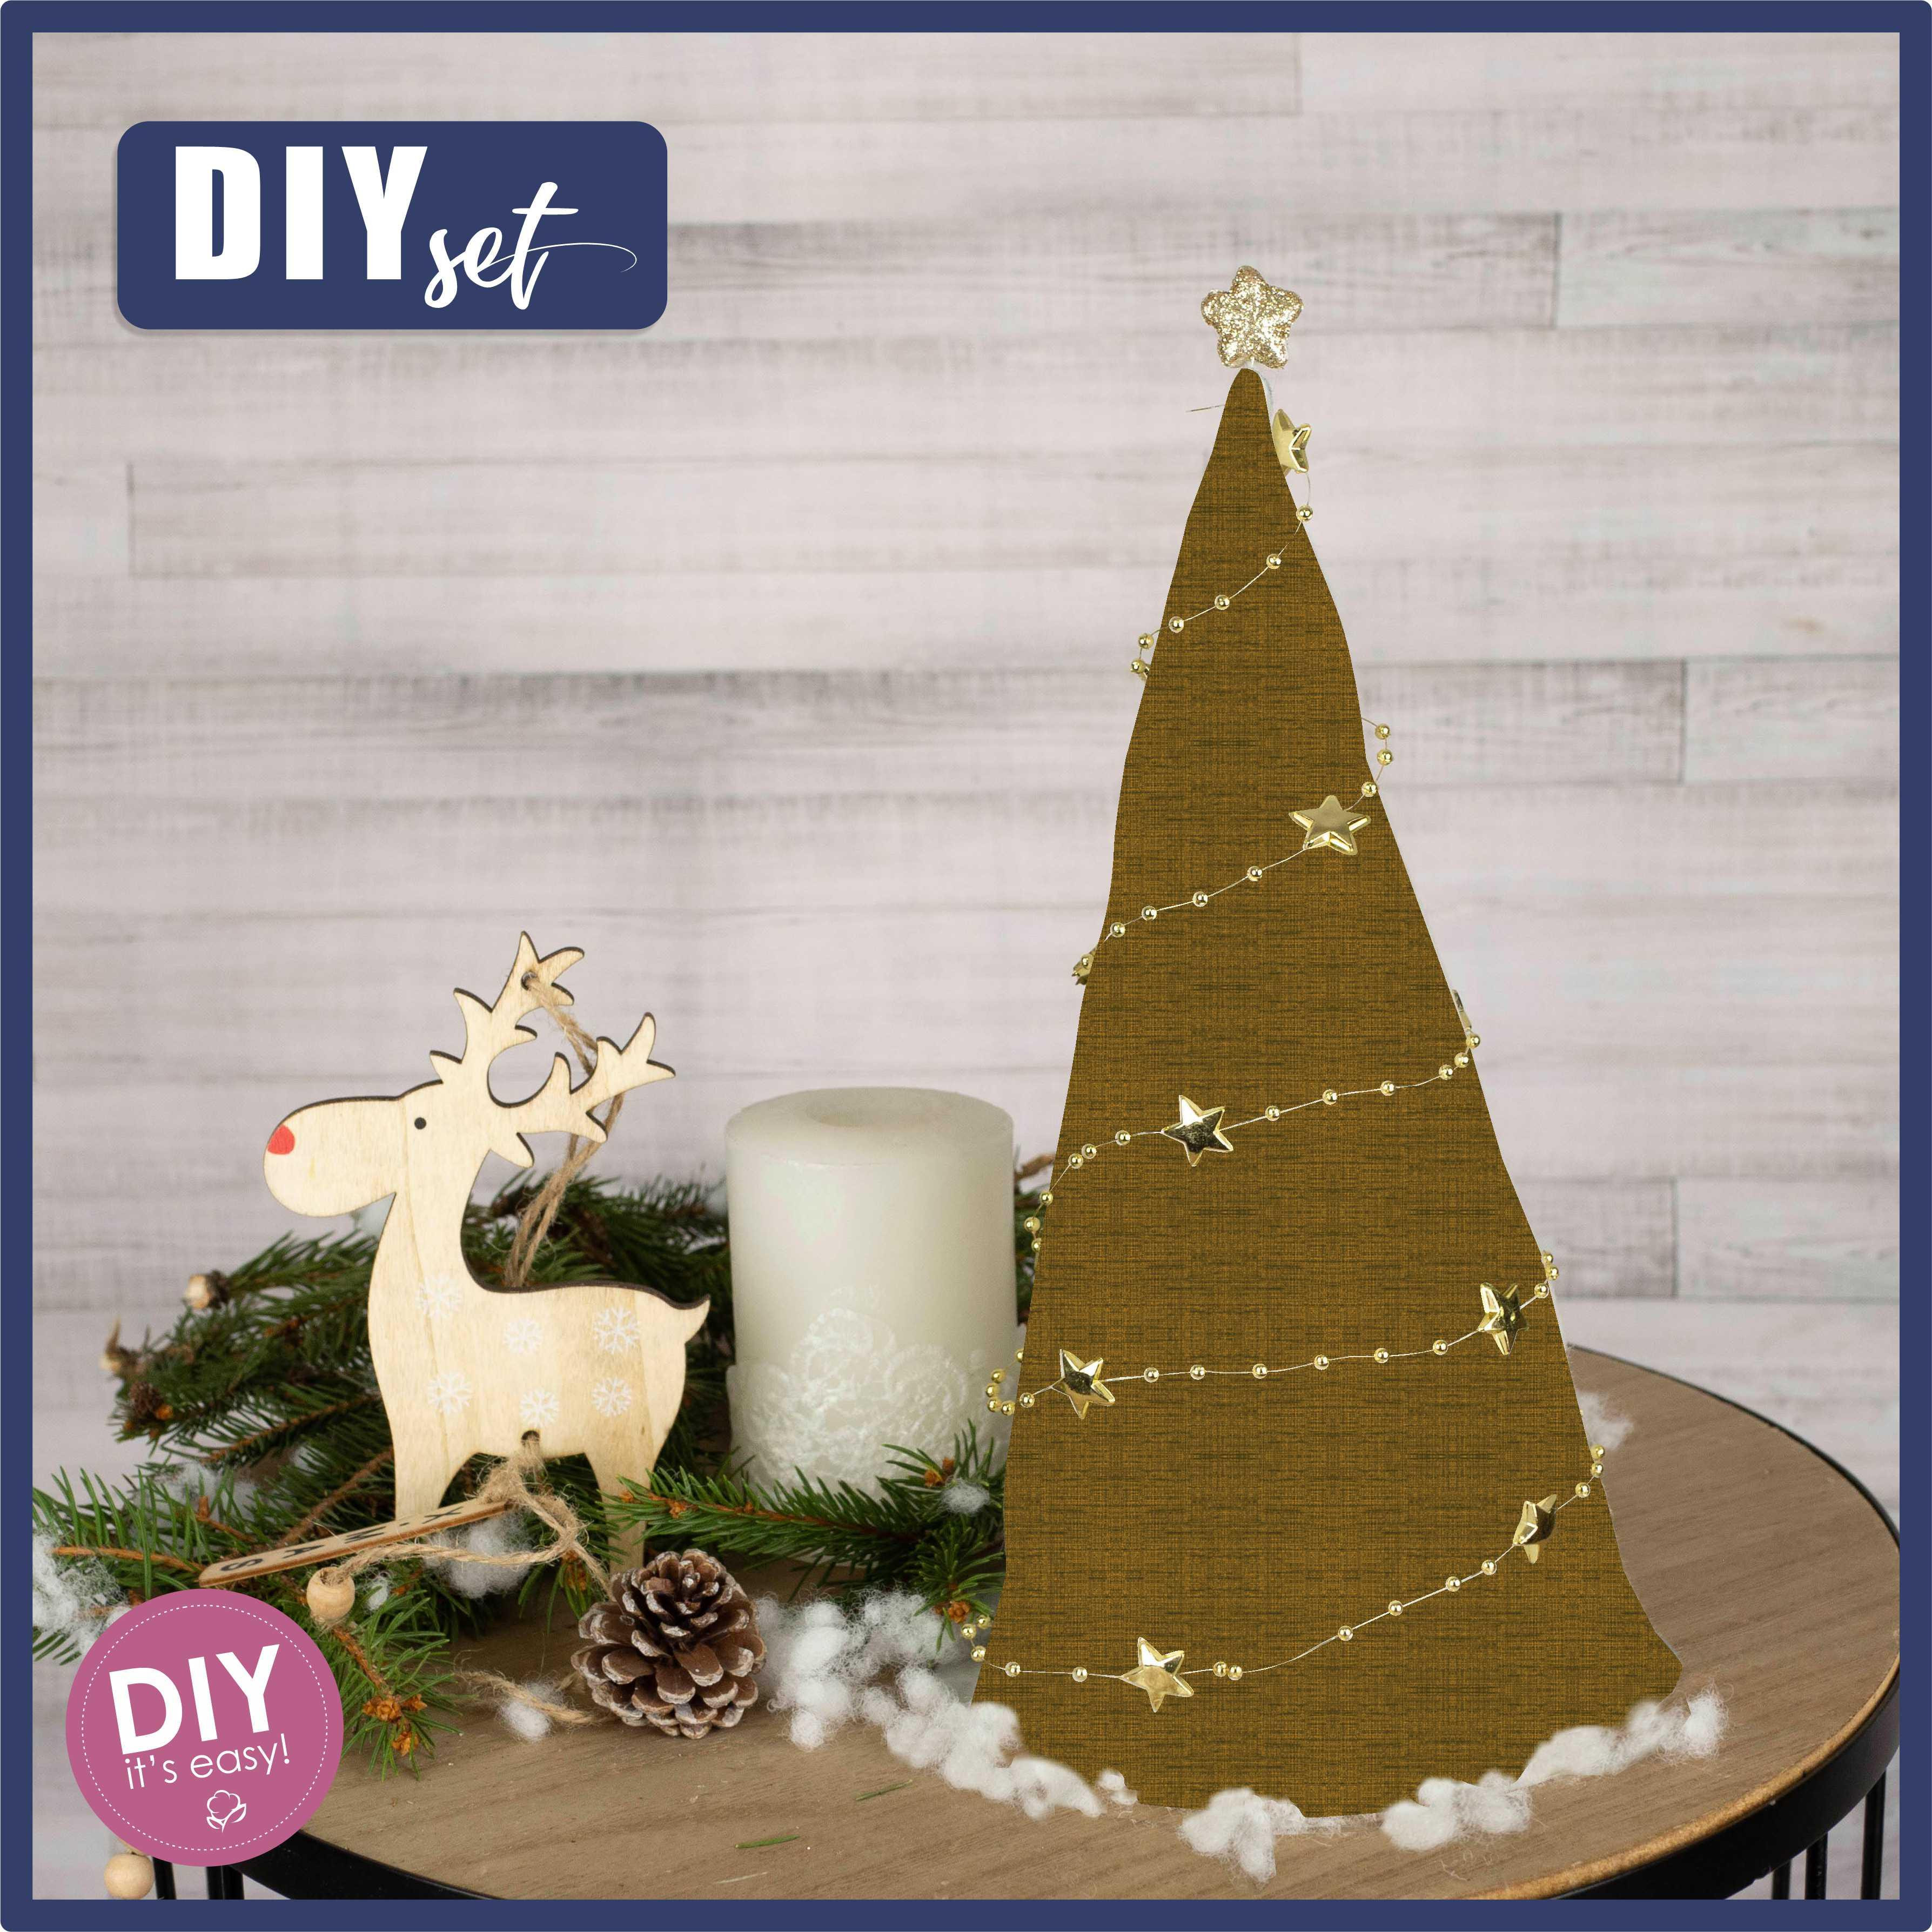 GROUCHY GNOME’S CHRISTMAS TREE - DIY IT'S EASY